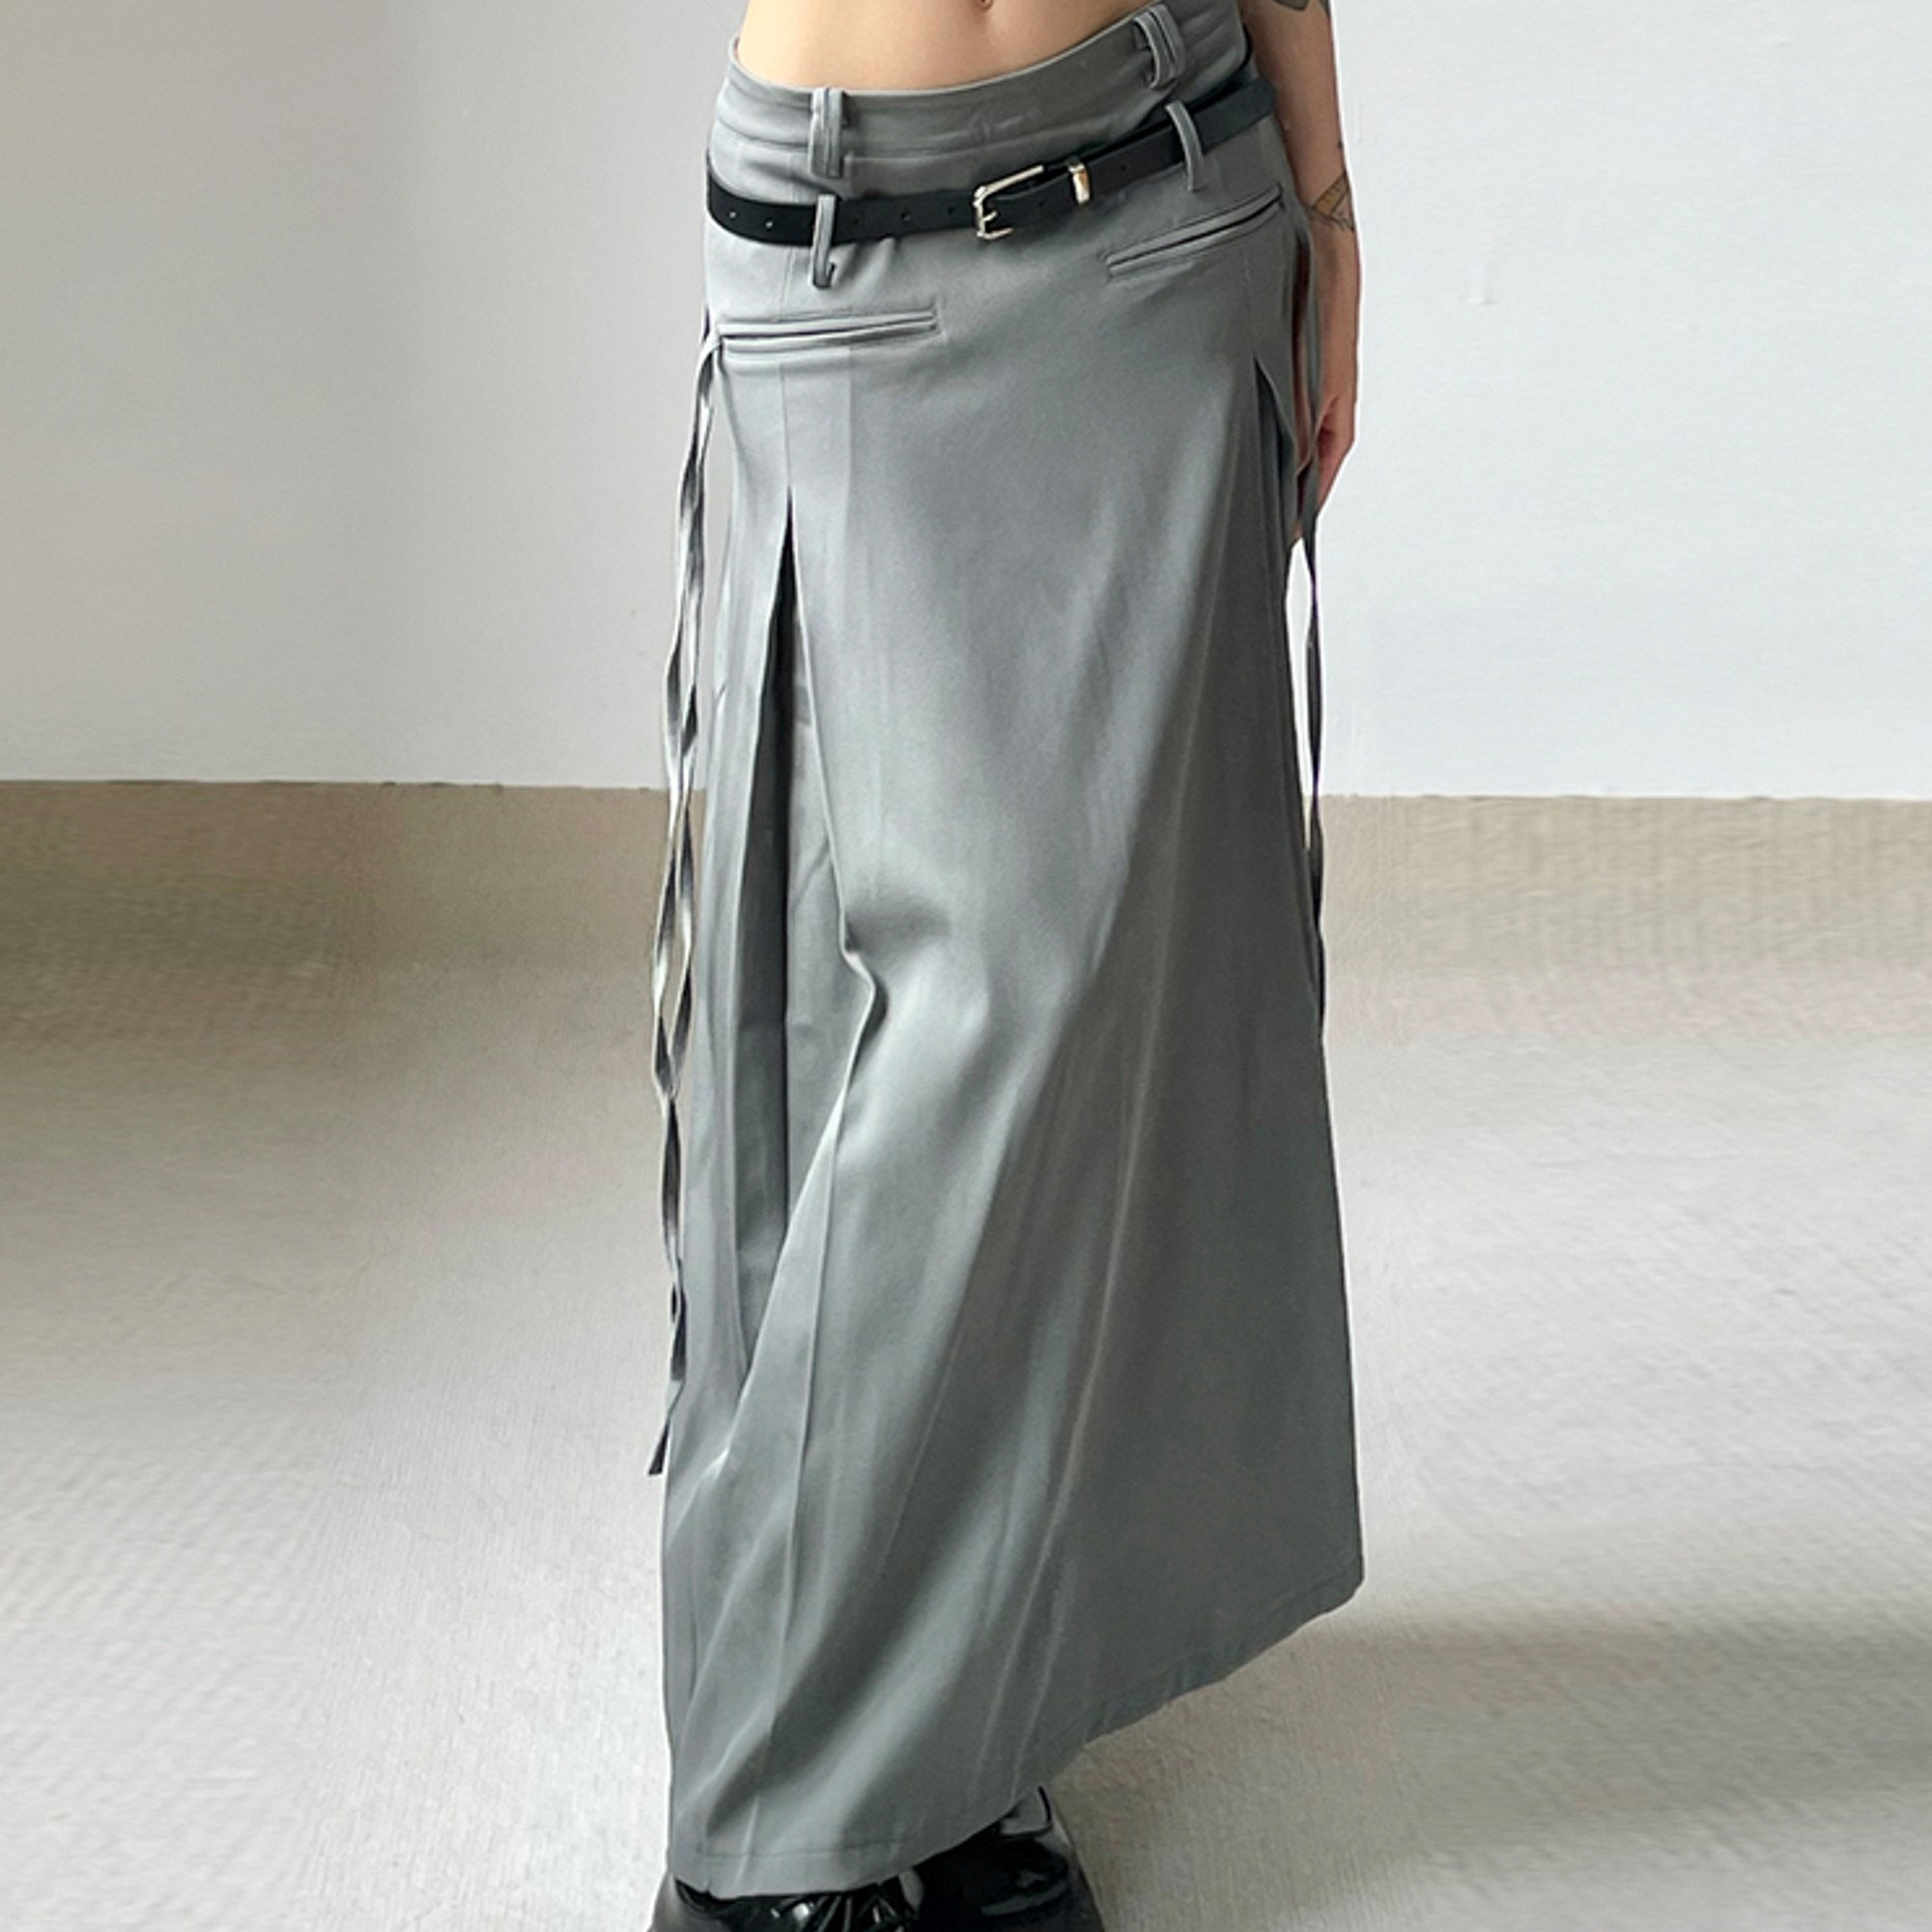 Y2K Pleated Maxi Skirt - Trendy Fashion for the Y2K Clothing Niche